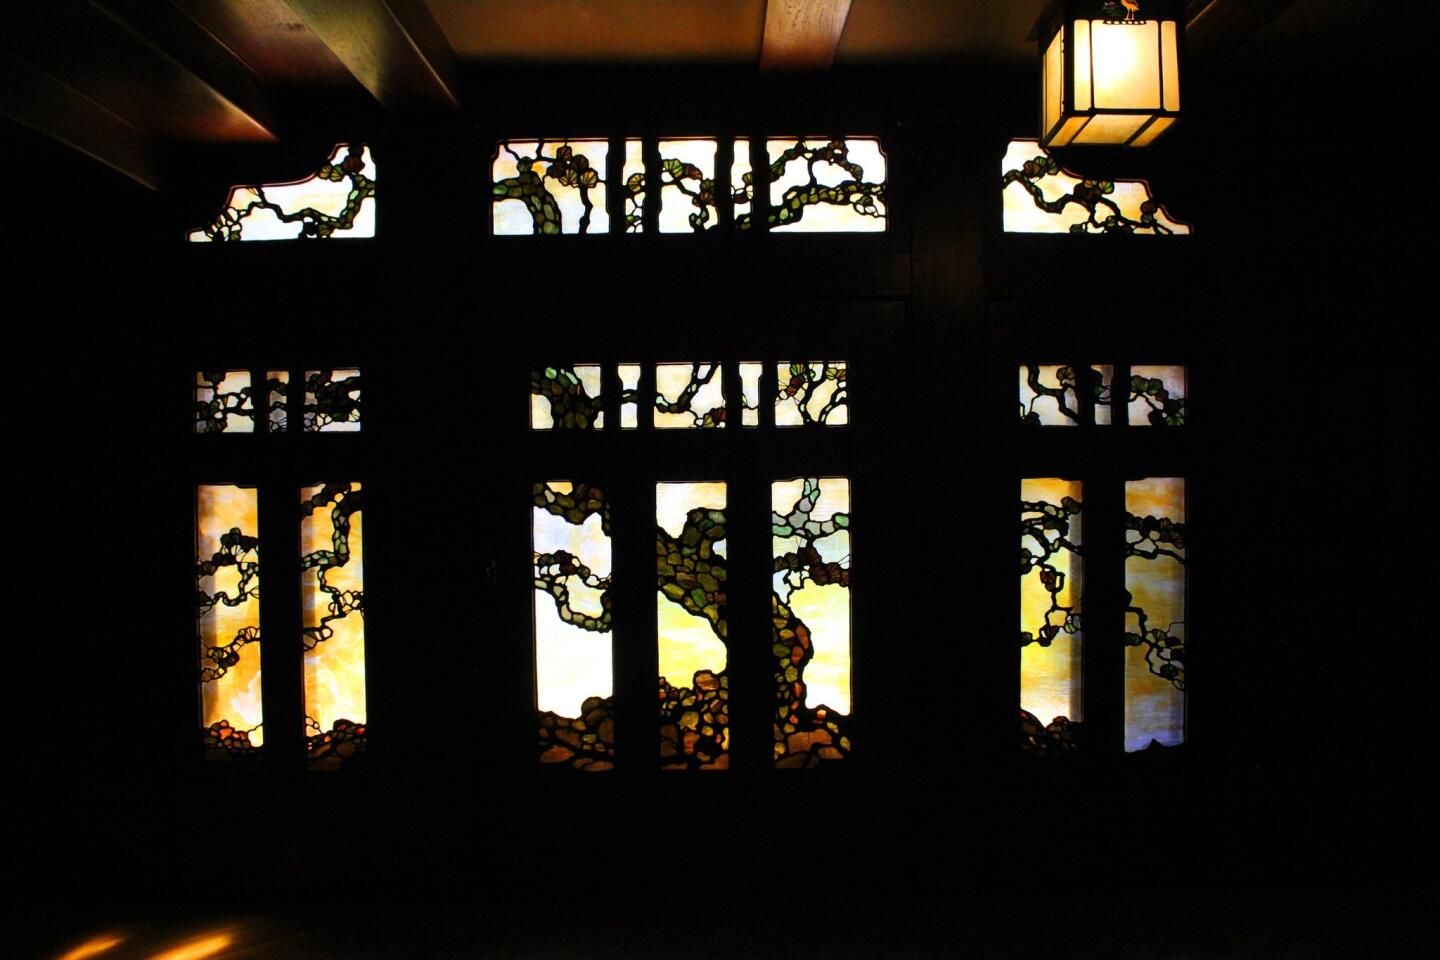 Machine Project's installations at the Gamble House are subtle and finding them can be almost like a treasure hunt. The result: the viewer spends more time noticing architects Greene & Greene's incredible design details, such as the warm glow of the Tree of Life triptych picture window.